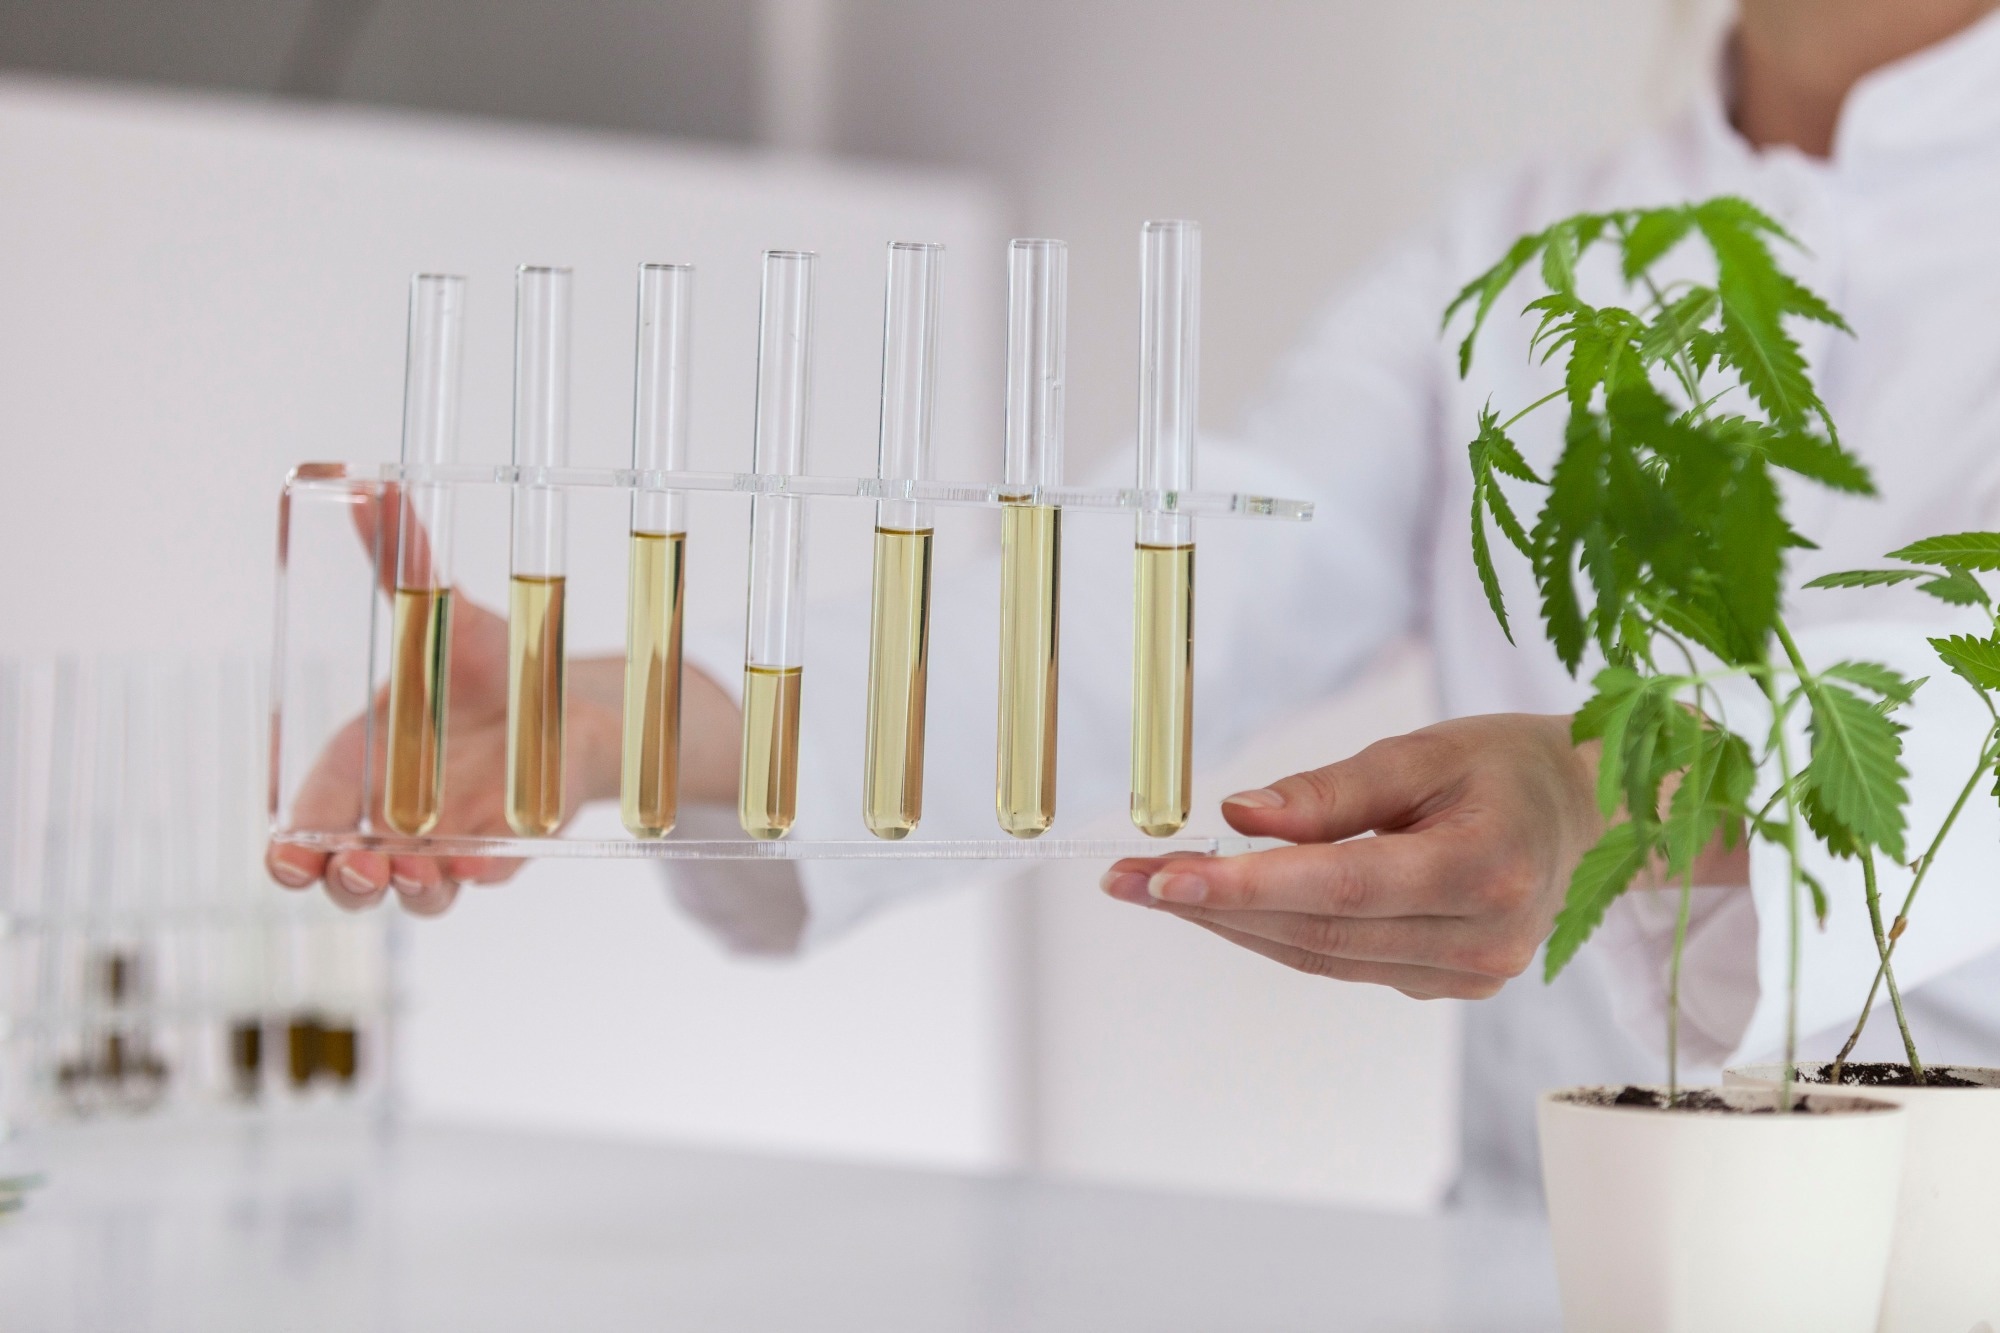 Study: A Metabolomics and Big Data Approach to Cannabis Authenticity (Authentomics). Image Credit: MexChriss/Shutterstock.com